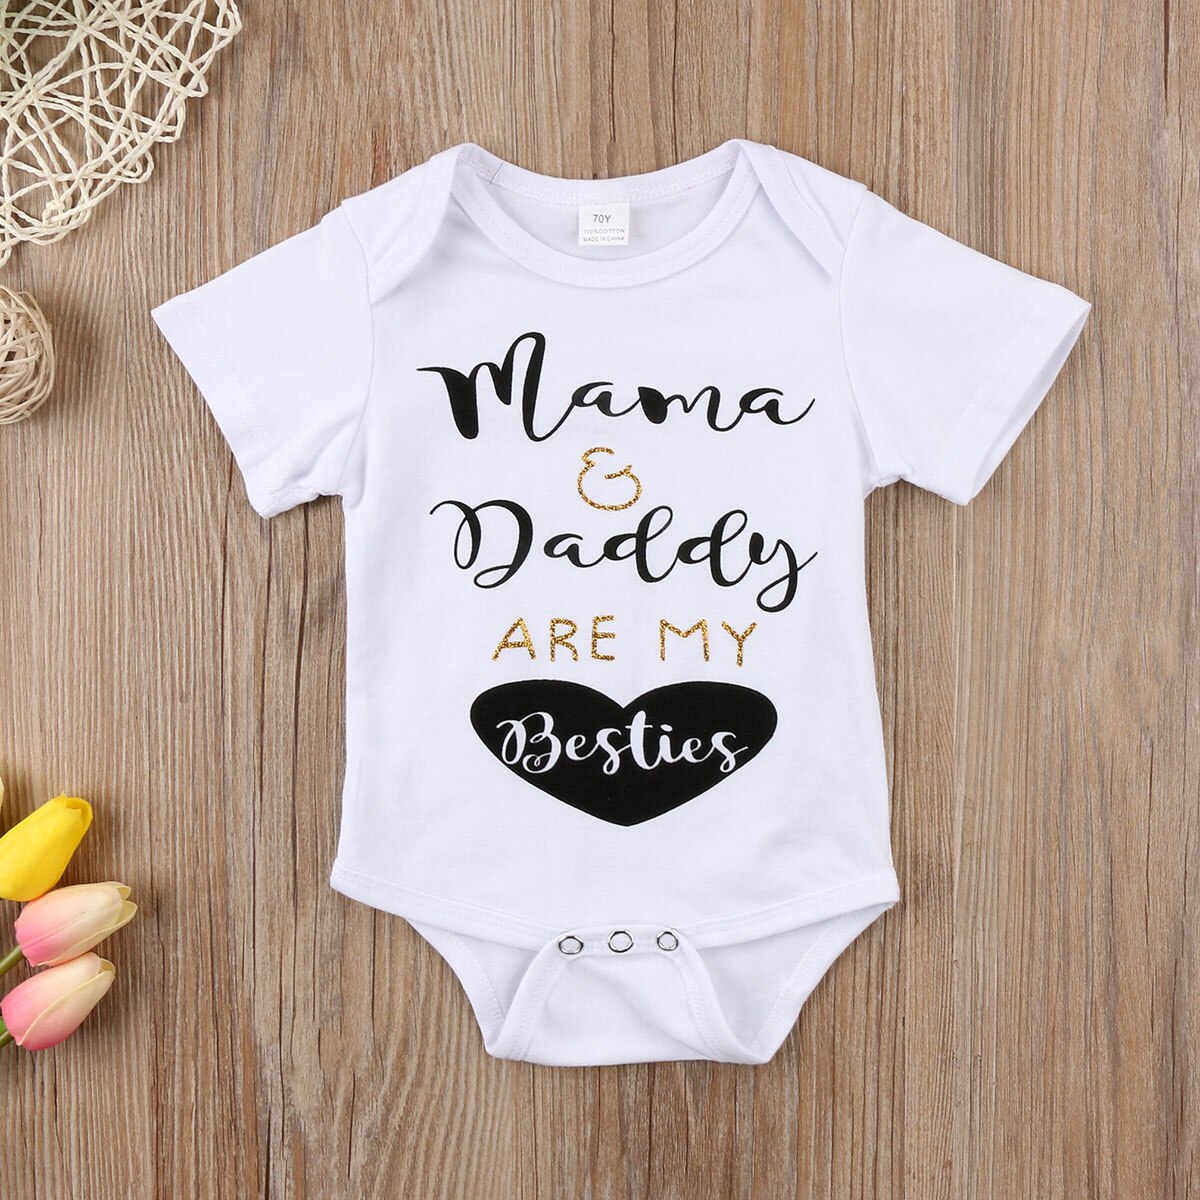 White Cute Letter Baby Girl Infant Cotton Daddy's Short Sleeve Cotton Bodysuits Jumpsuit Playsuit Clothes Outfit - ebowsos